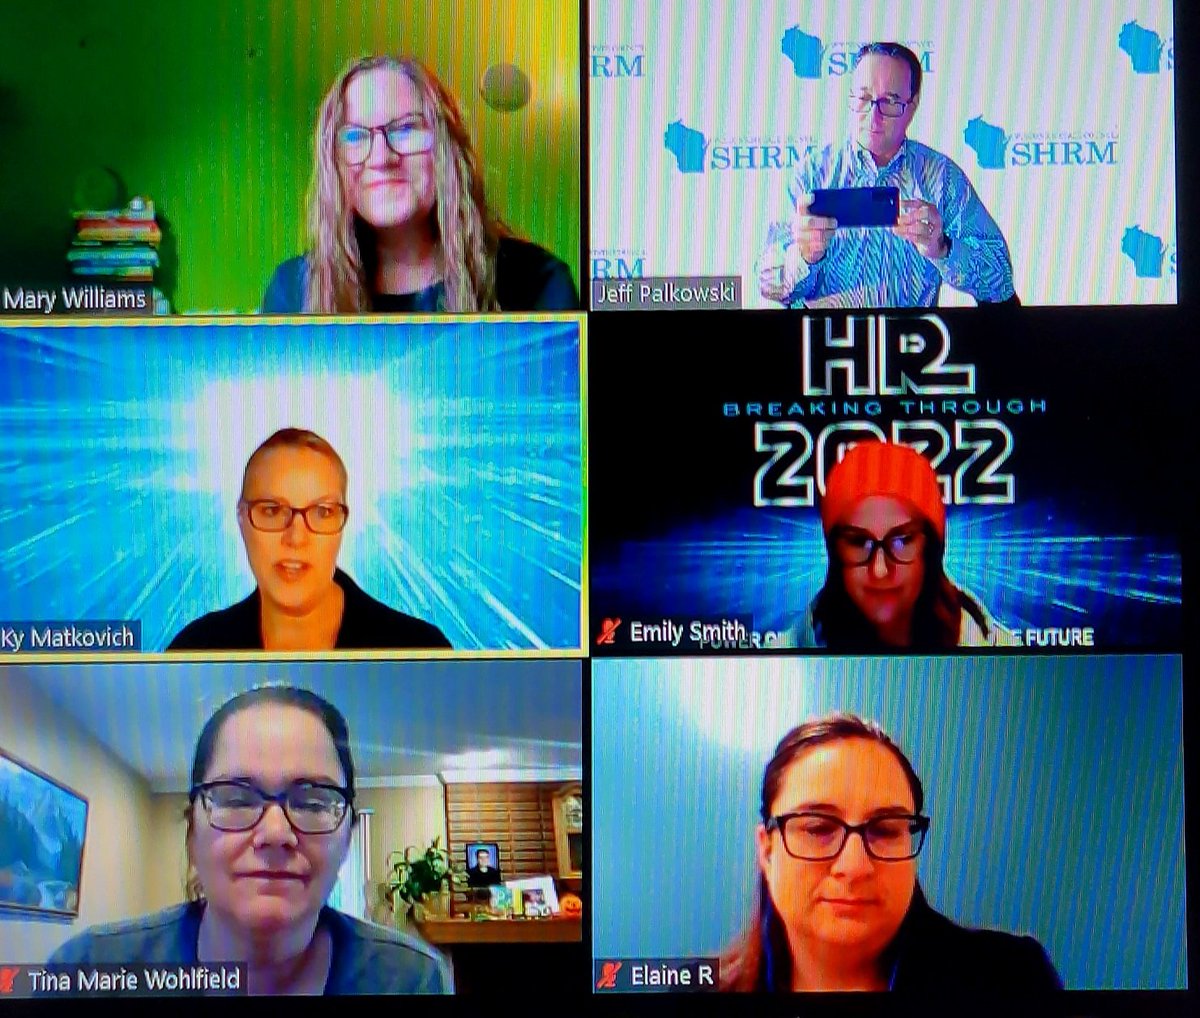 A final Zoom check in for our amazing @WISHRM State Conference SMILE Team! We look forward to connecting with you all in-person and on social next week! #WISHRM  #WISHRM22 #SMILETeam @conmkw @KyraMatkovichHR @TMWohlfield @ElaineRuh @putthehappyinHR @taylorforsheehr @JeffPally